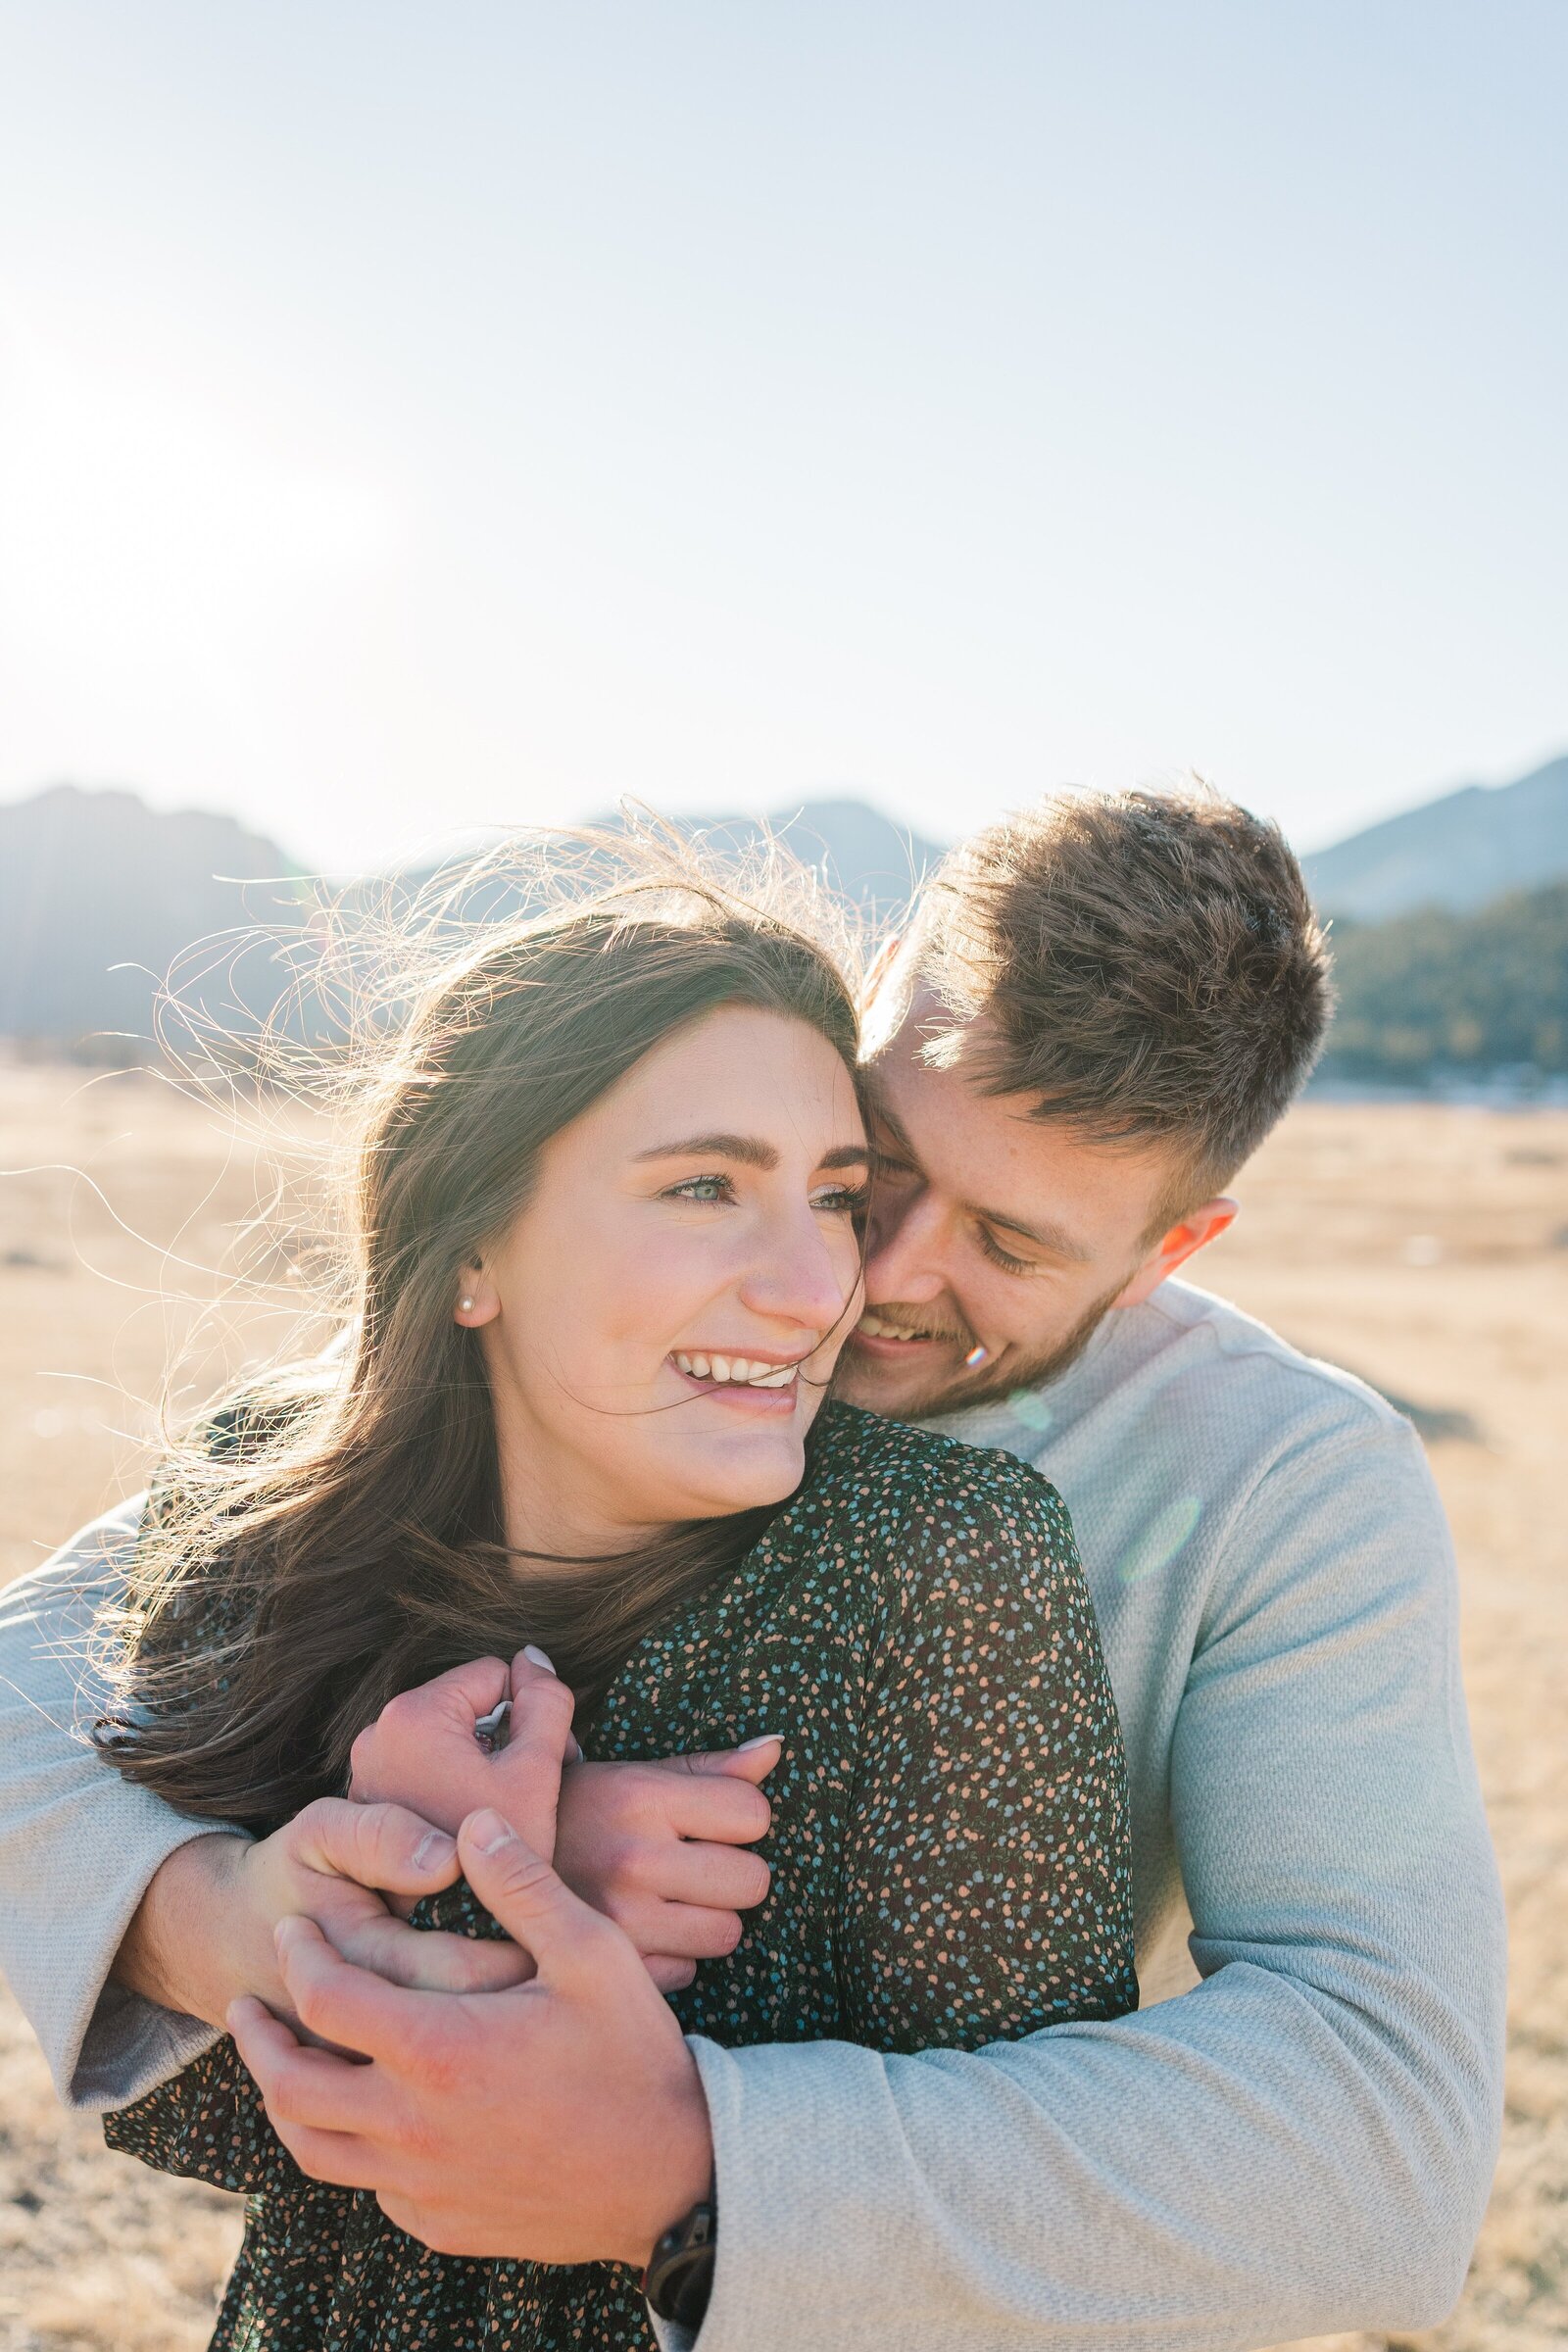 At Samantha Immer Photography, we believe that every love story is unique and deserves to be told authentically. Trust us to capture your special day with personalized, meaningful, and authentic storytelling in Colorado wedding photography.